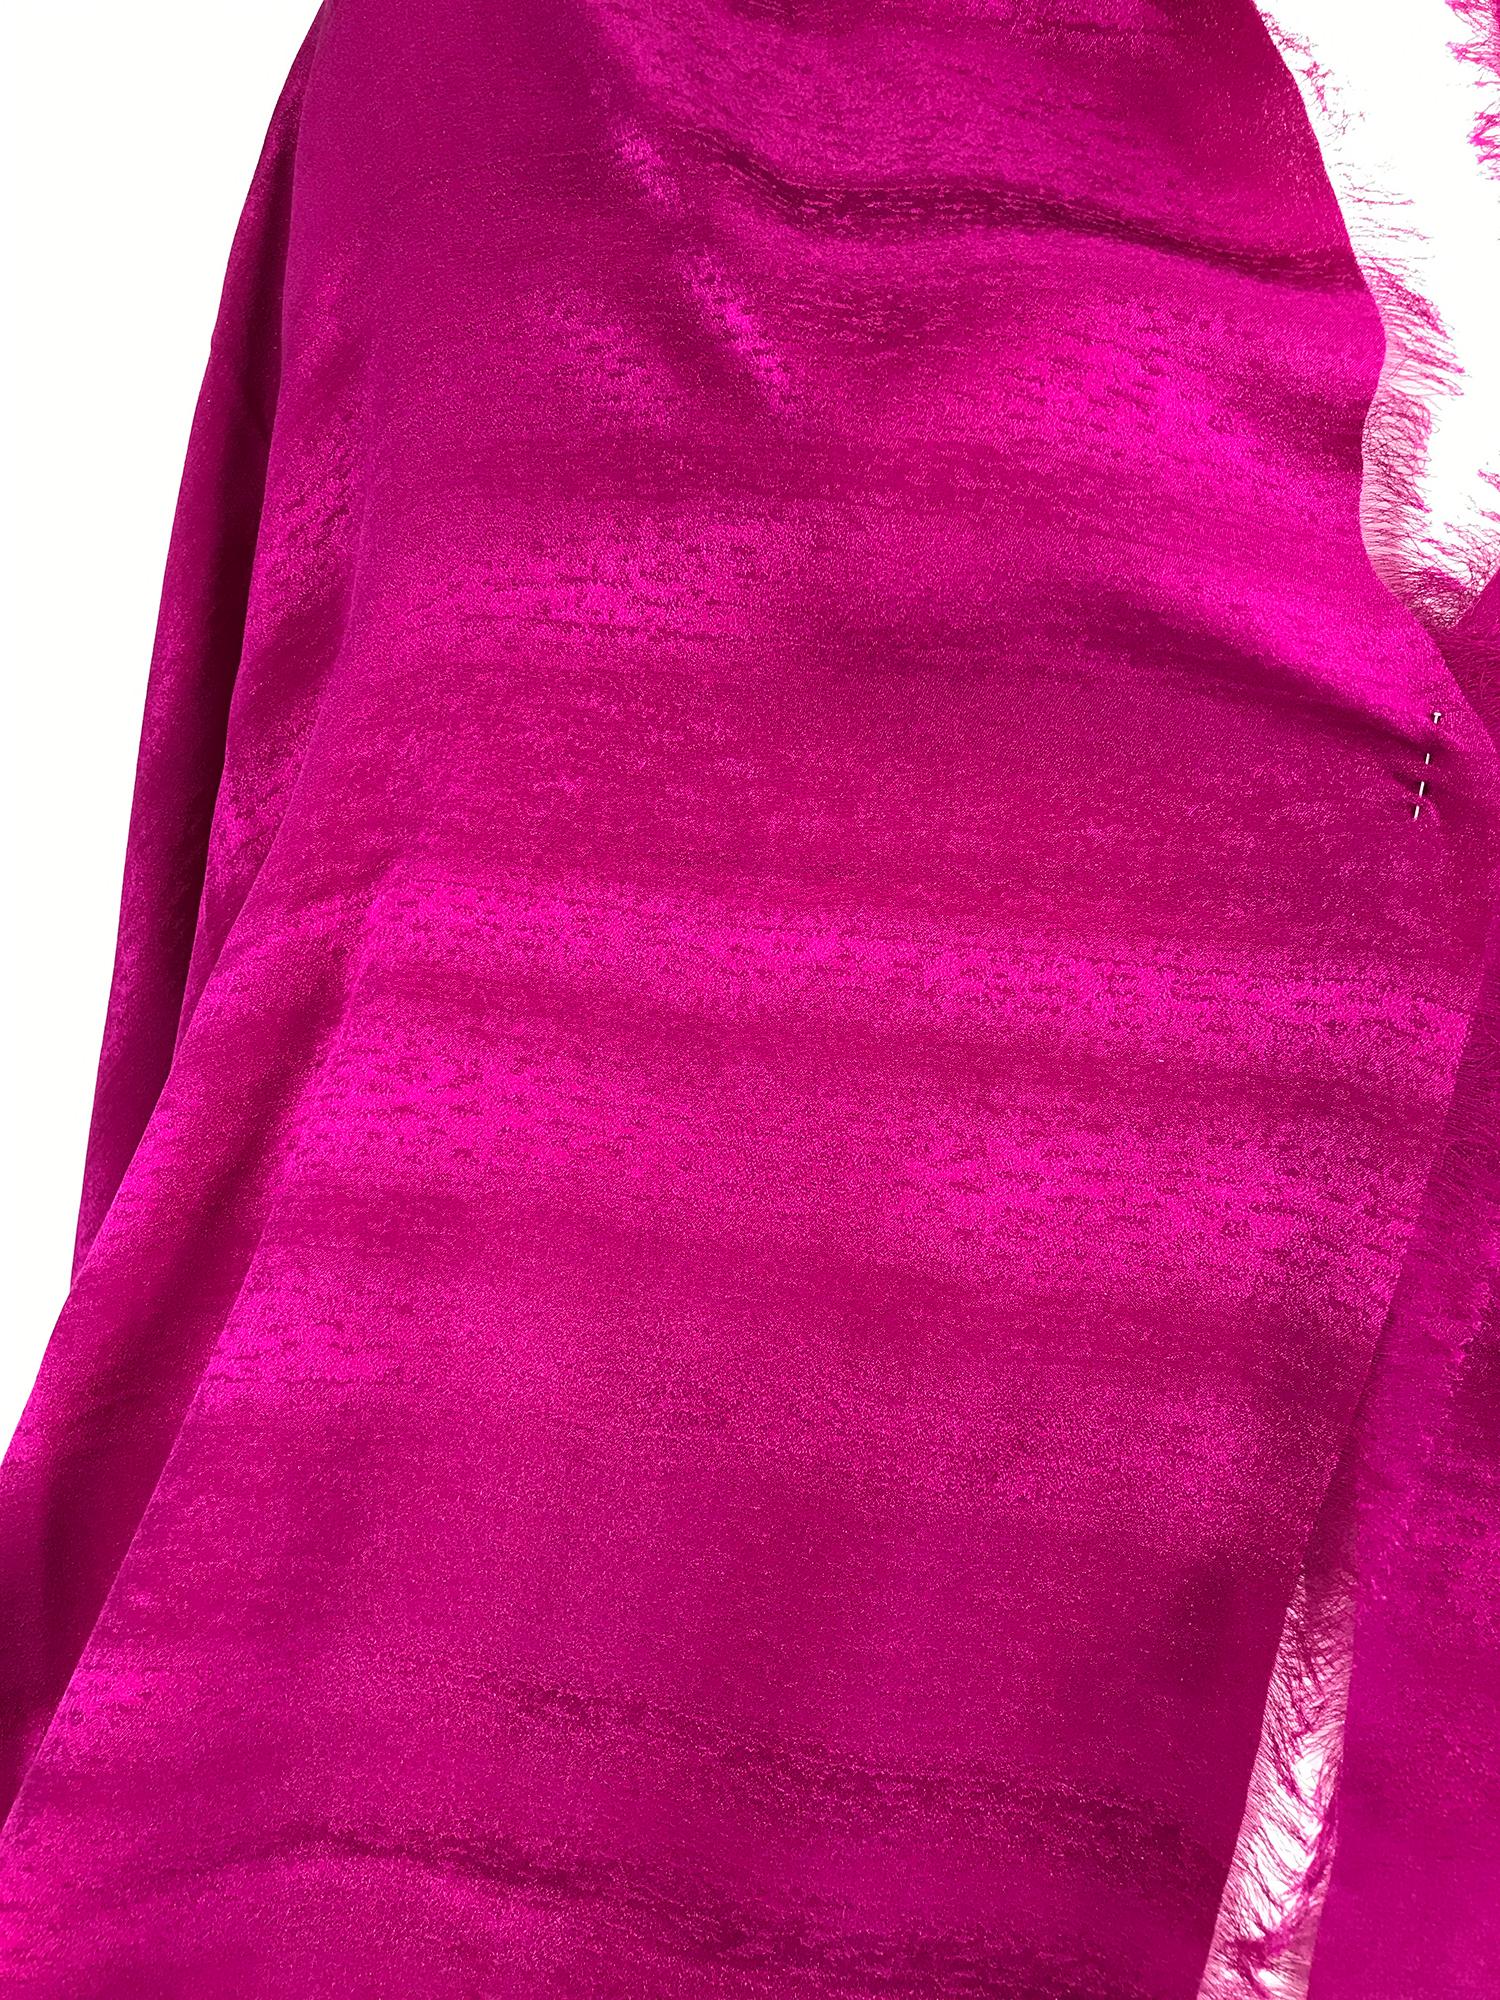 Gucci magenta silk jacquard X-long rectangle, self fringe shawl/scarf.  This beautiful scarf in Pantone's colour of the year for 2023, magenta. Wear as a shawl or scarf the silk is amazing with a subtle woven design. Looks barely, if ever worn. 24